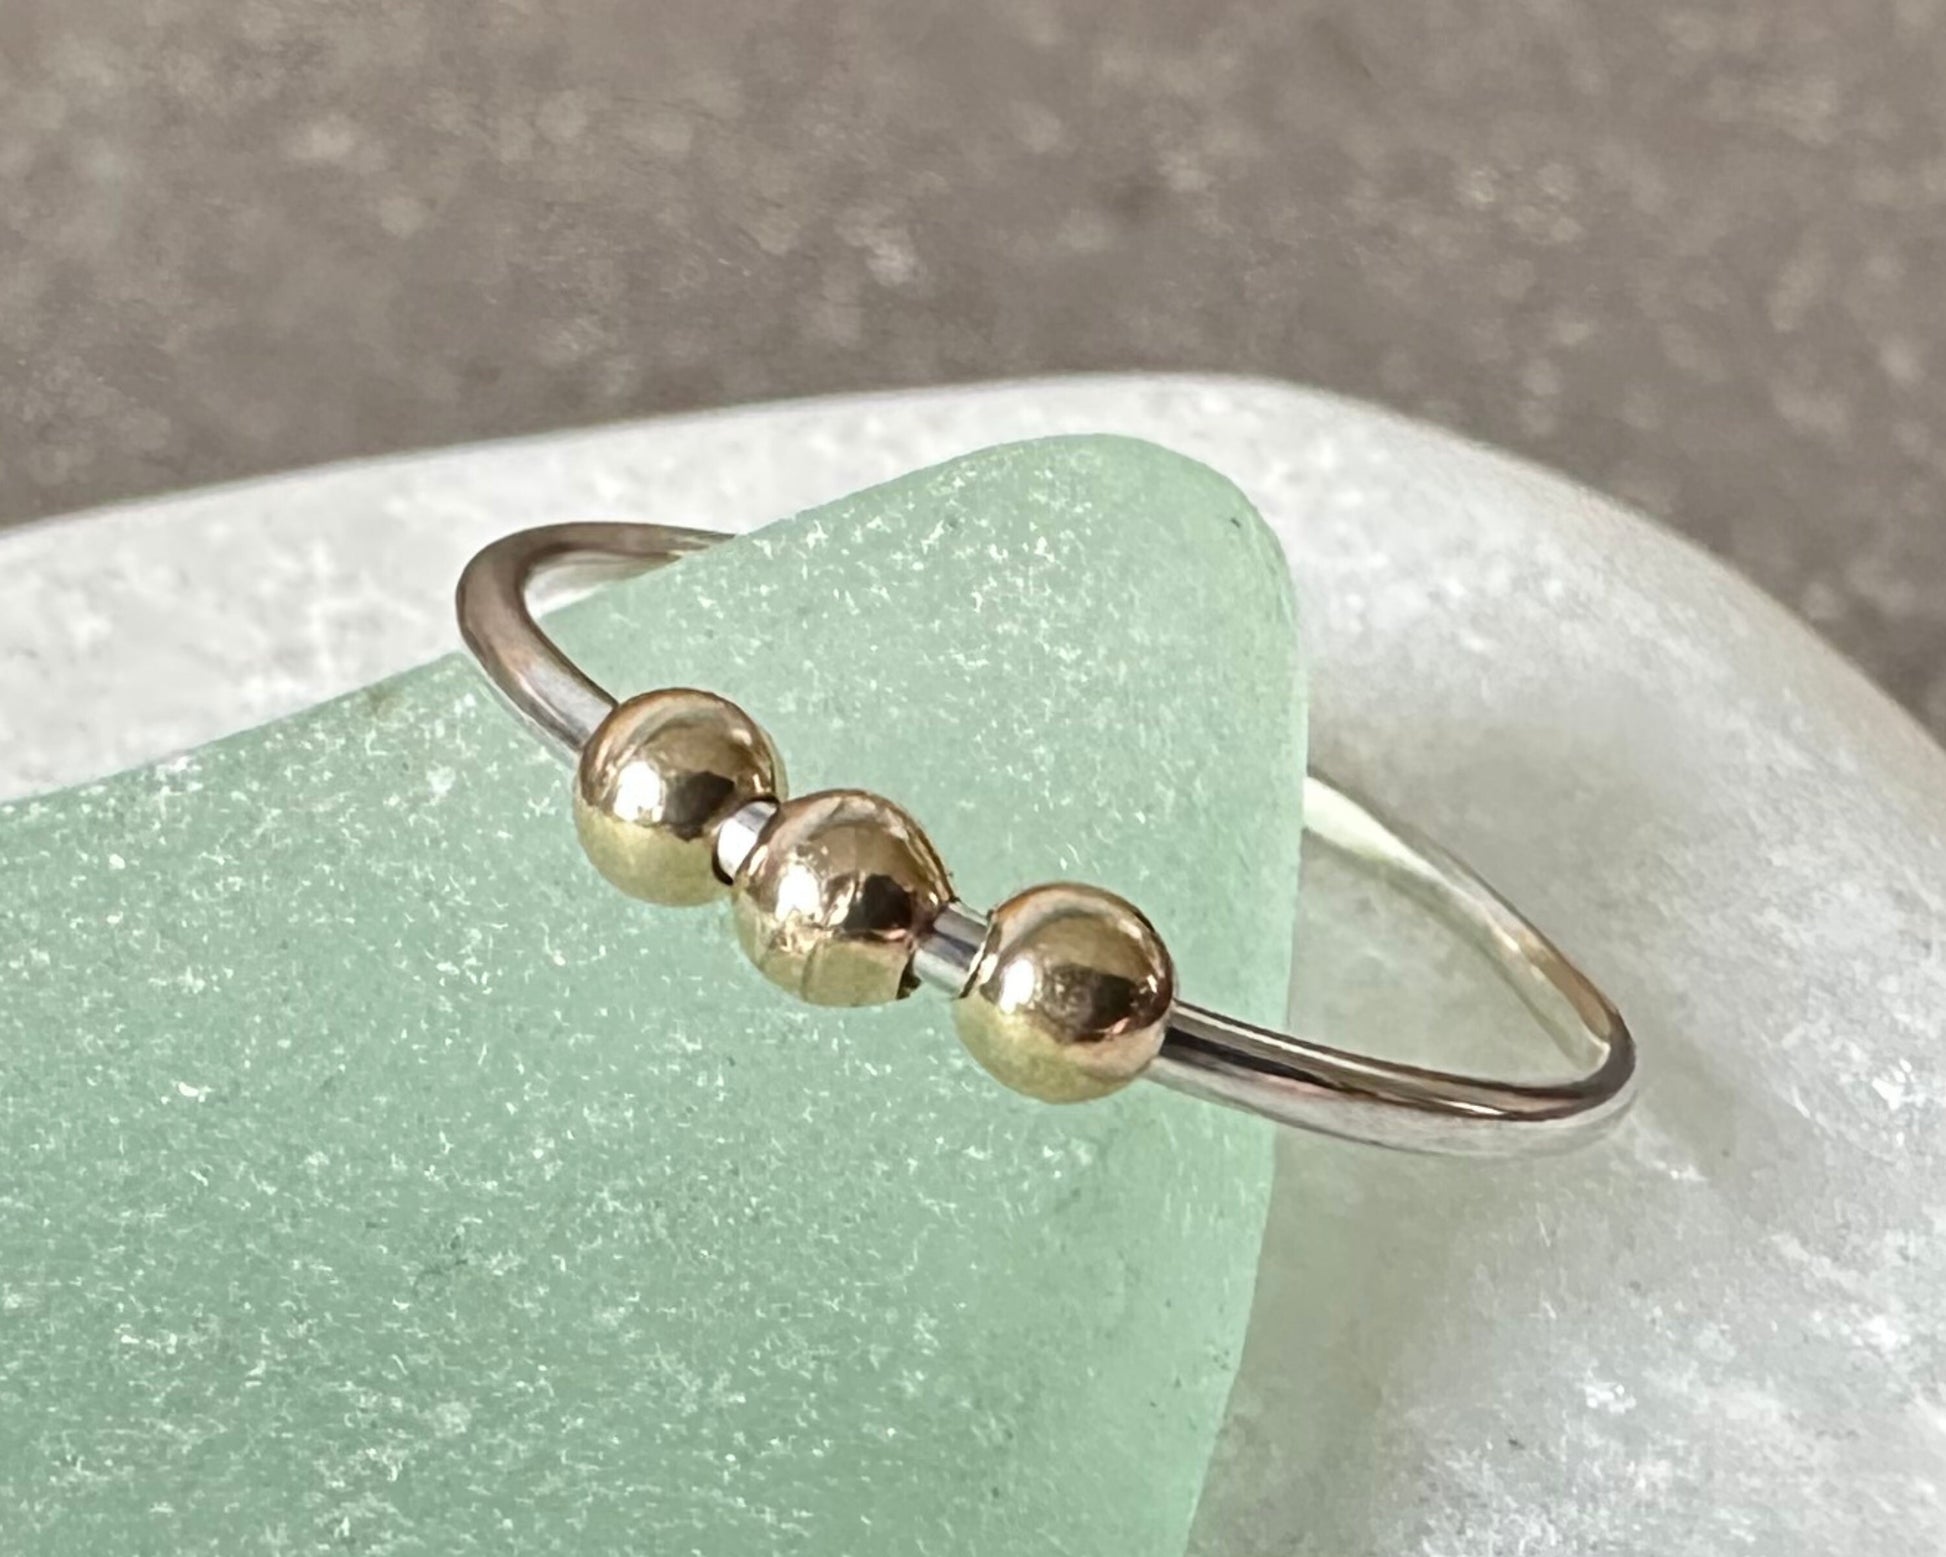 Fidget Ring Handmade from 925 Sterling Silver and 9ct Gold Beads, Gold and Silver Stackable Ring Band, Anxiety Ring, Spinner Ring